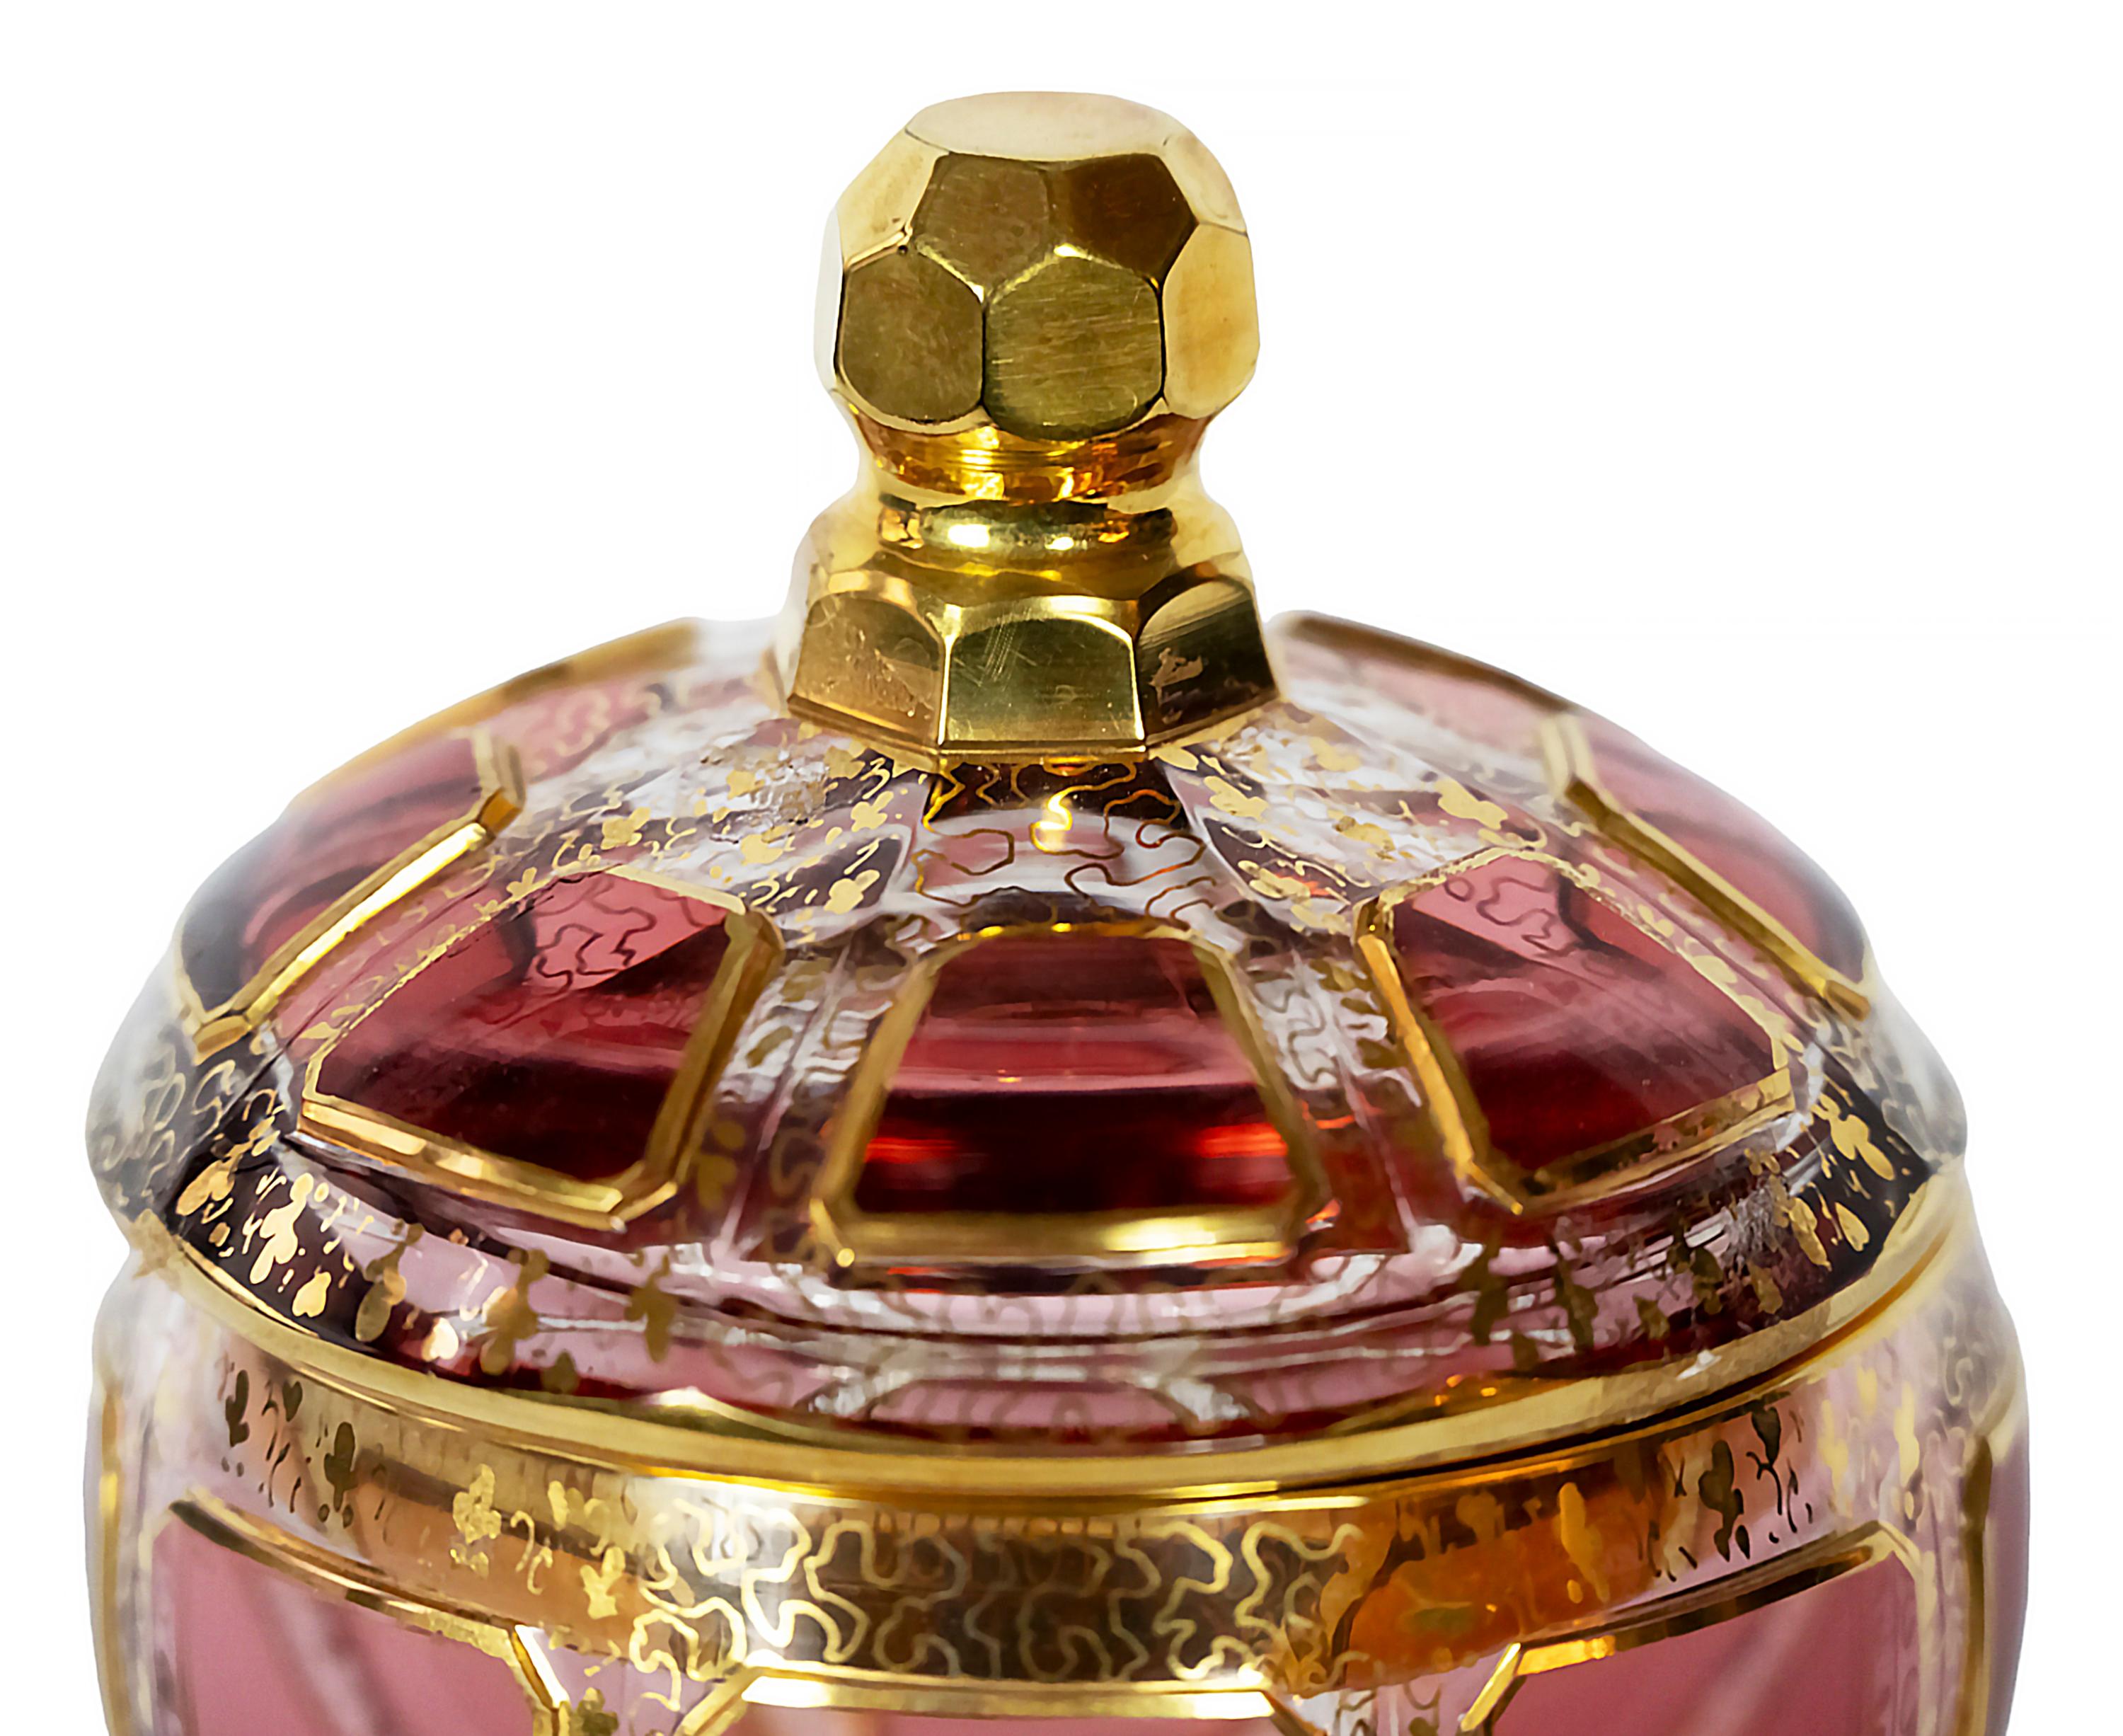 Bohemian glass lidded candy dish/box. 
Transparent glass decorated with raspberry colour glass, gilt trims and gold pattern through the glass.